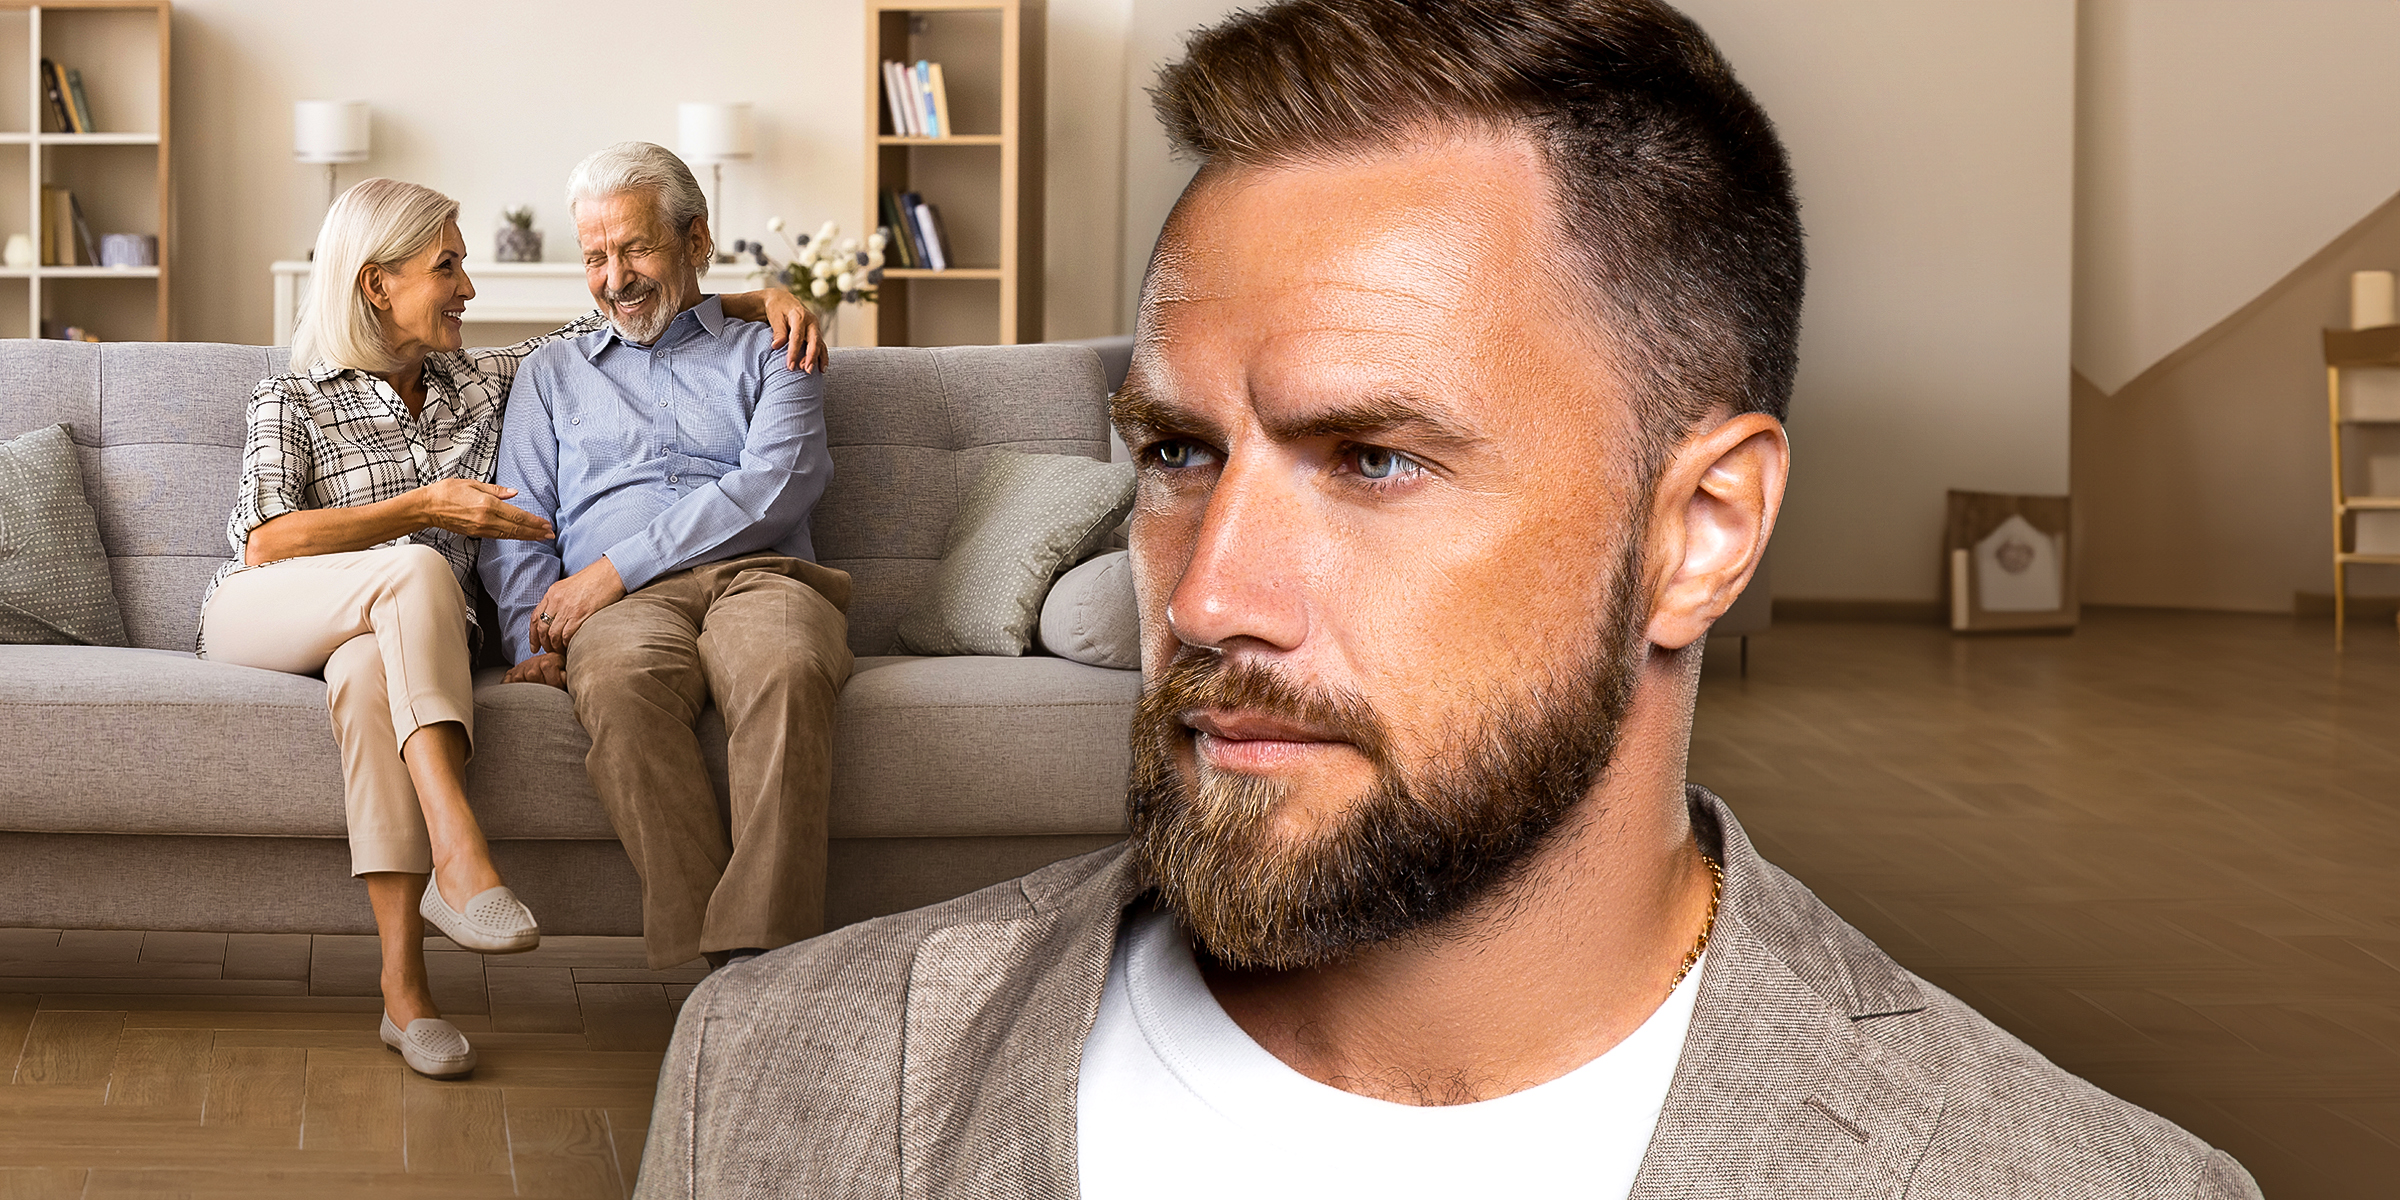 A bearded man pictured with an elderly couple in the background | Source: Shutterstock